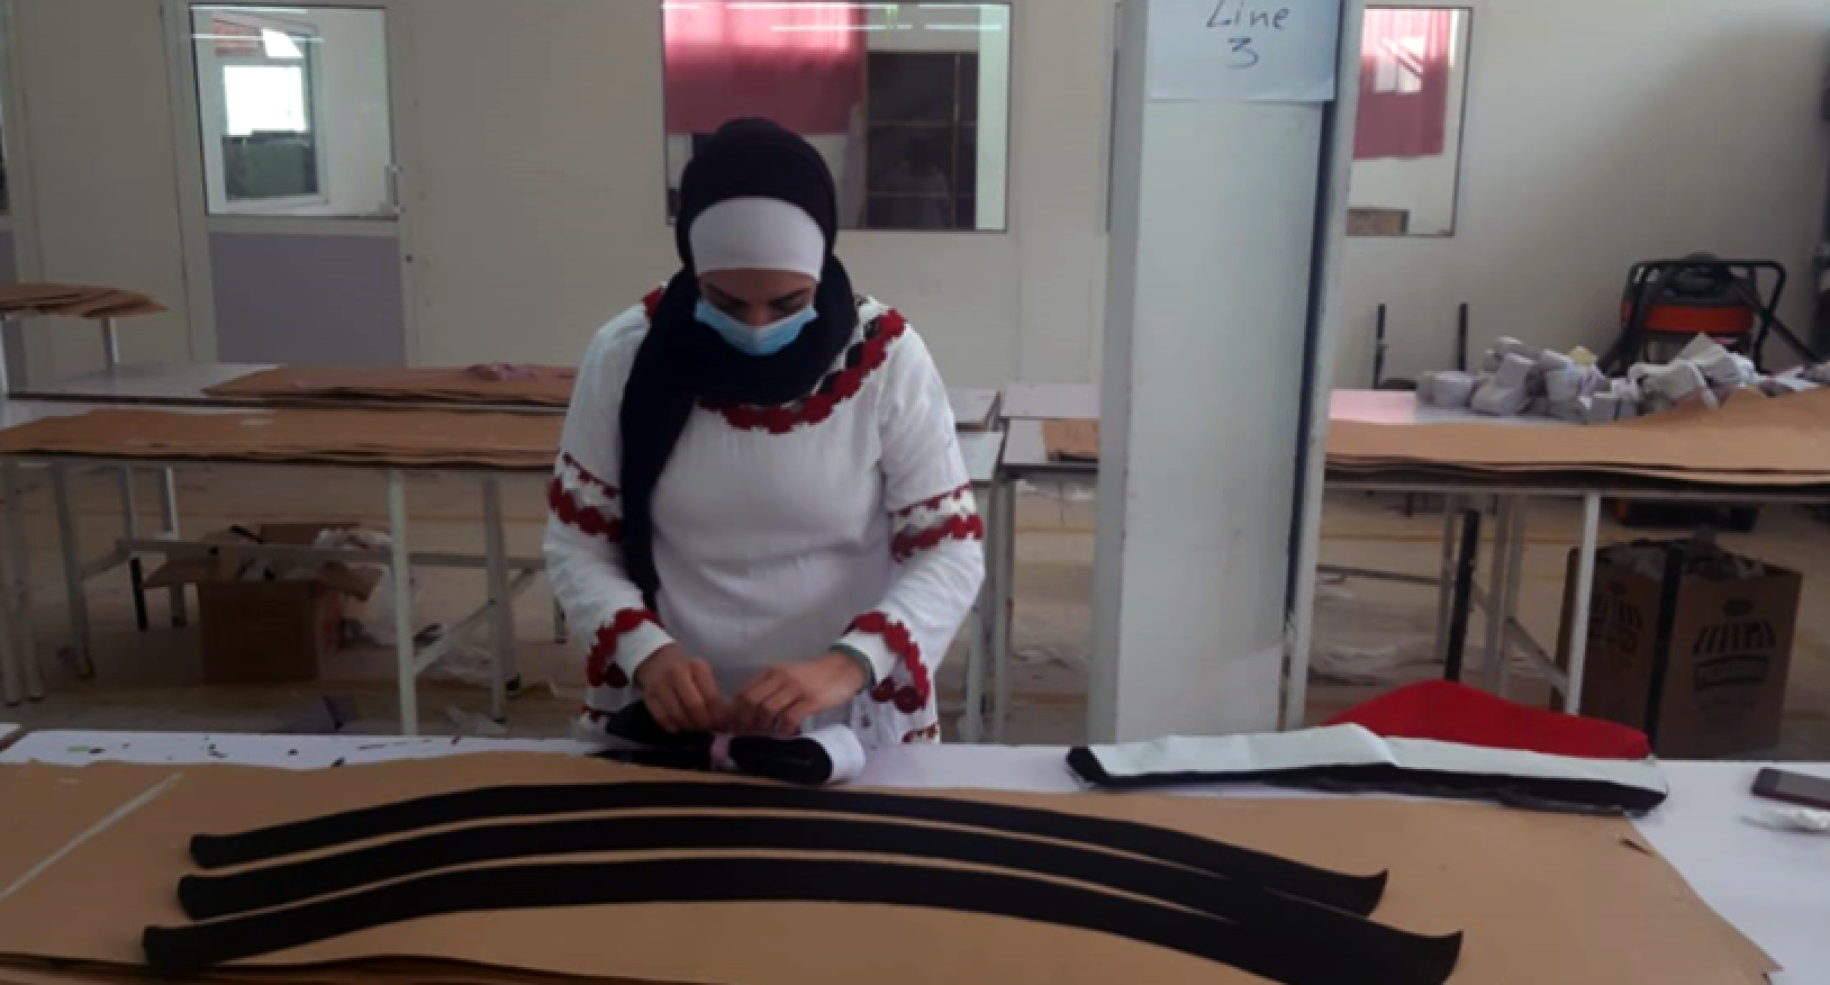 A woman wearing a protective face mask concentrates on a garment in a manufacturing space.